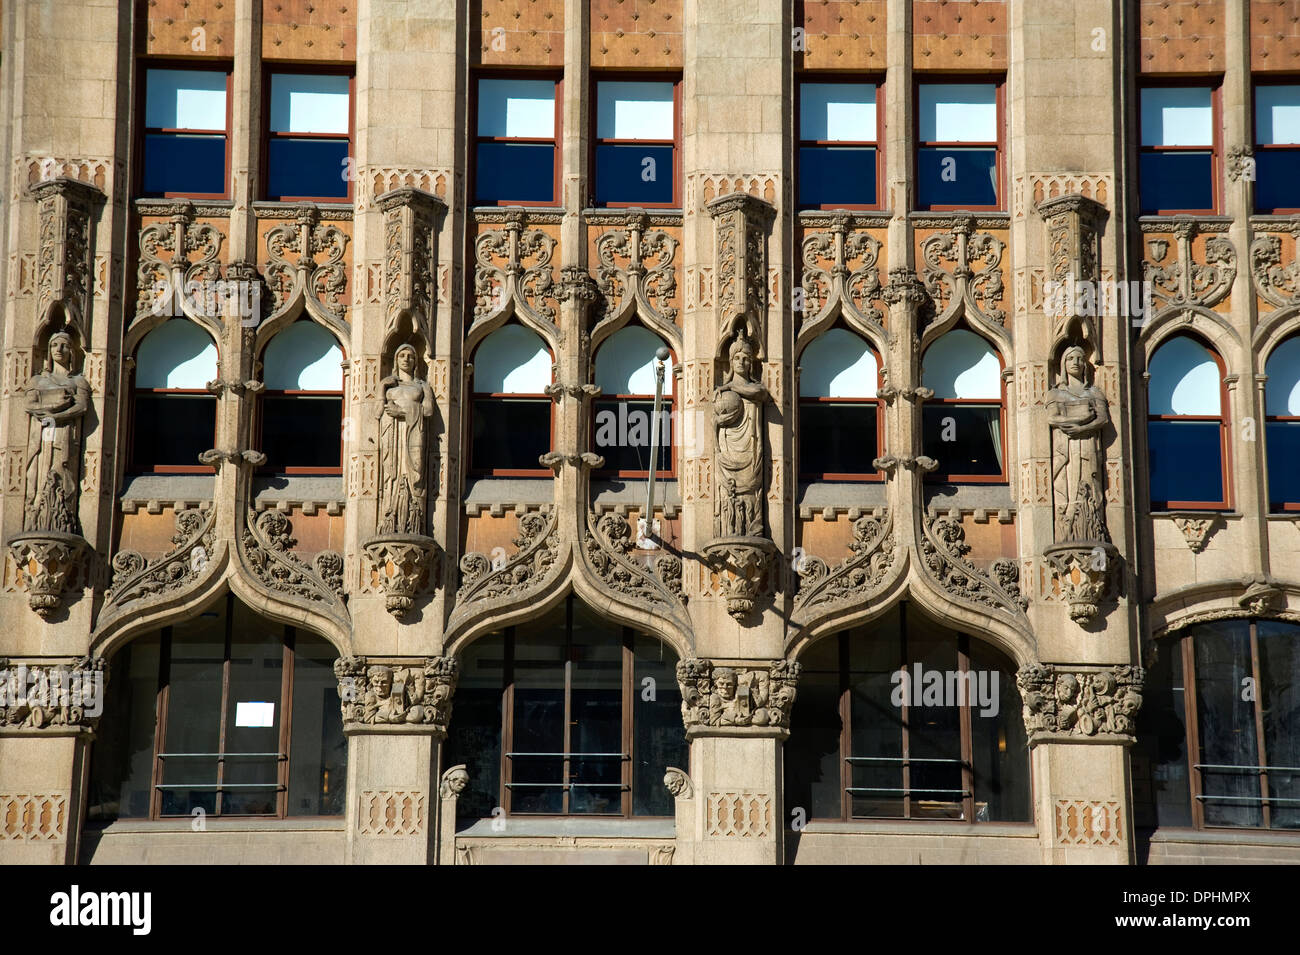 Art deco facade of the old United Artists movie theater on Broadway in Downtown Los Angeles Stock Photo